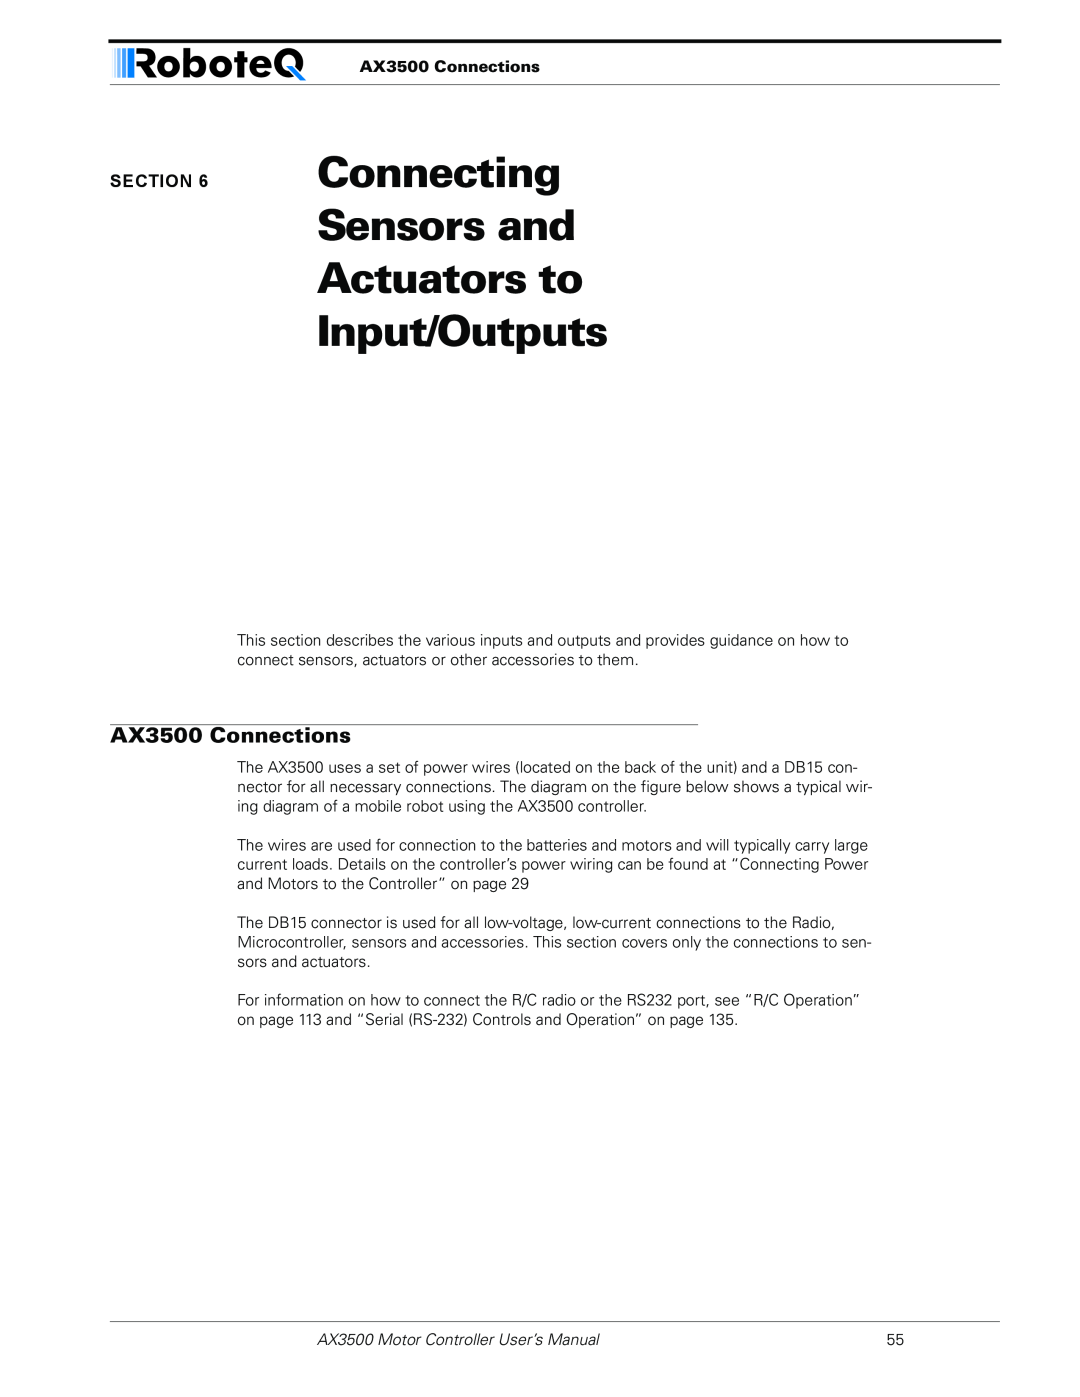 RoboteQ Connecting Sensors and Actuators to Input/Outputs, AX3500 Connections, AX3500 Motor Controller User’s Manual 